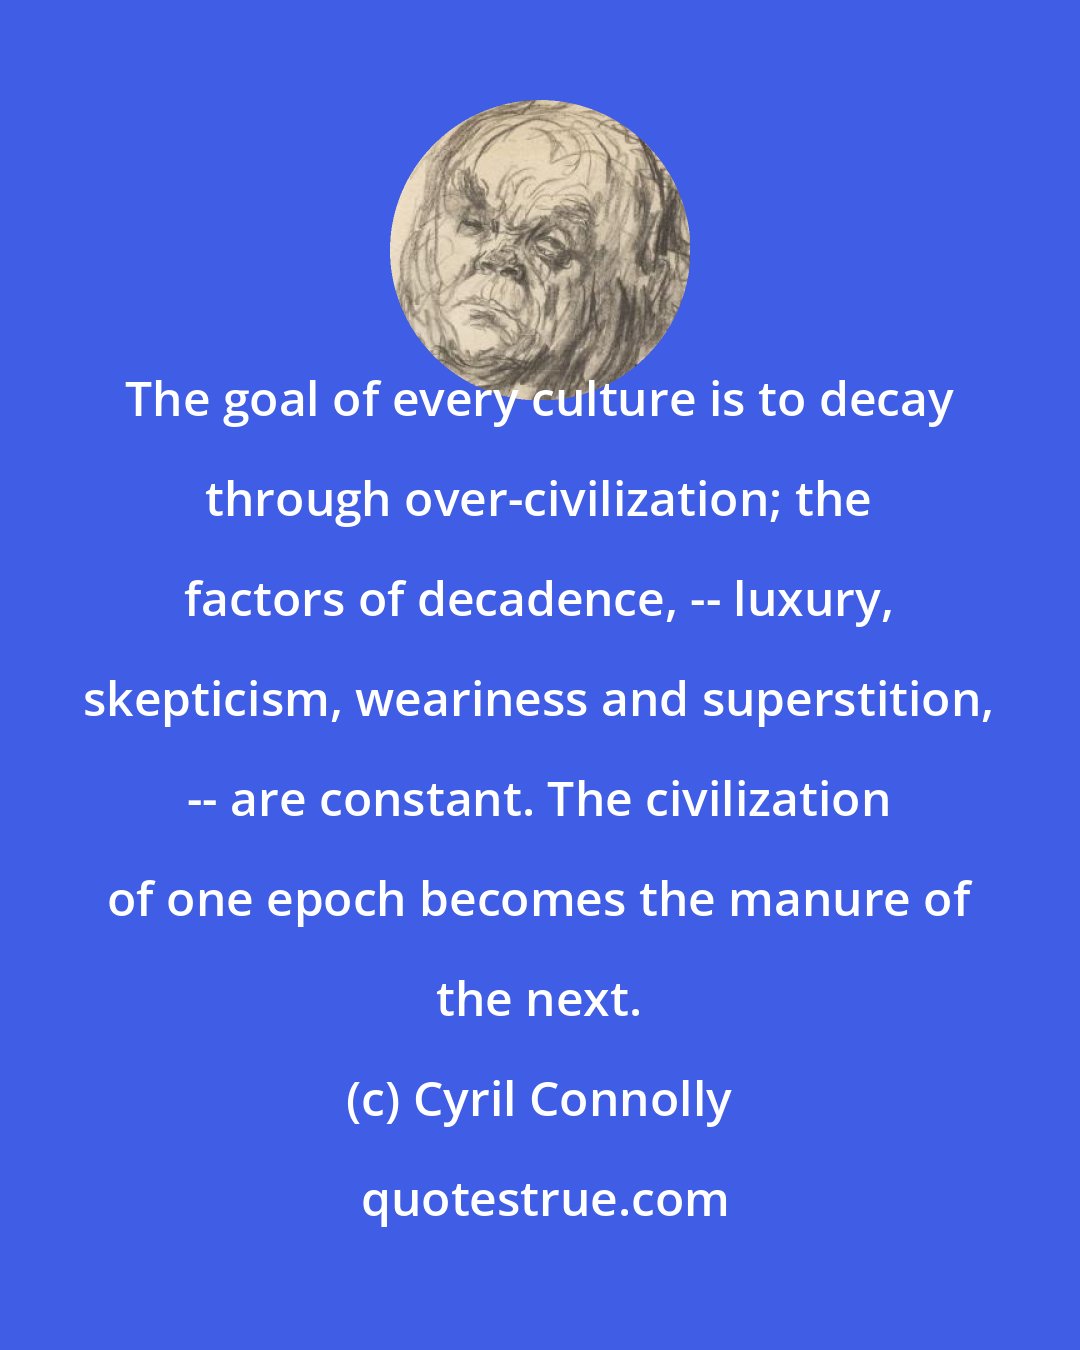 Cyril Connolly: The goal of every culture is to decay through over-civilization; the factors of decadence, -- luxury, skepticism, weariness and superstition, -- are constant. The civilization of one epoch becomes the manure of the next.